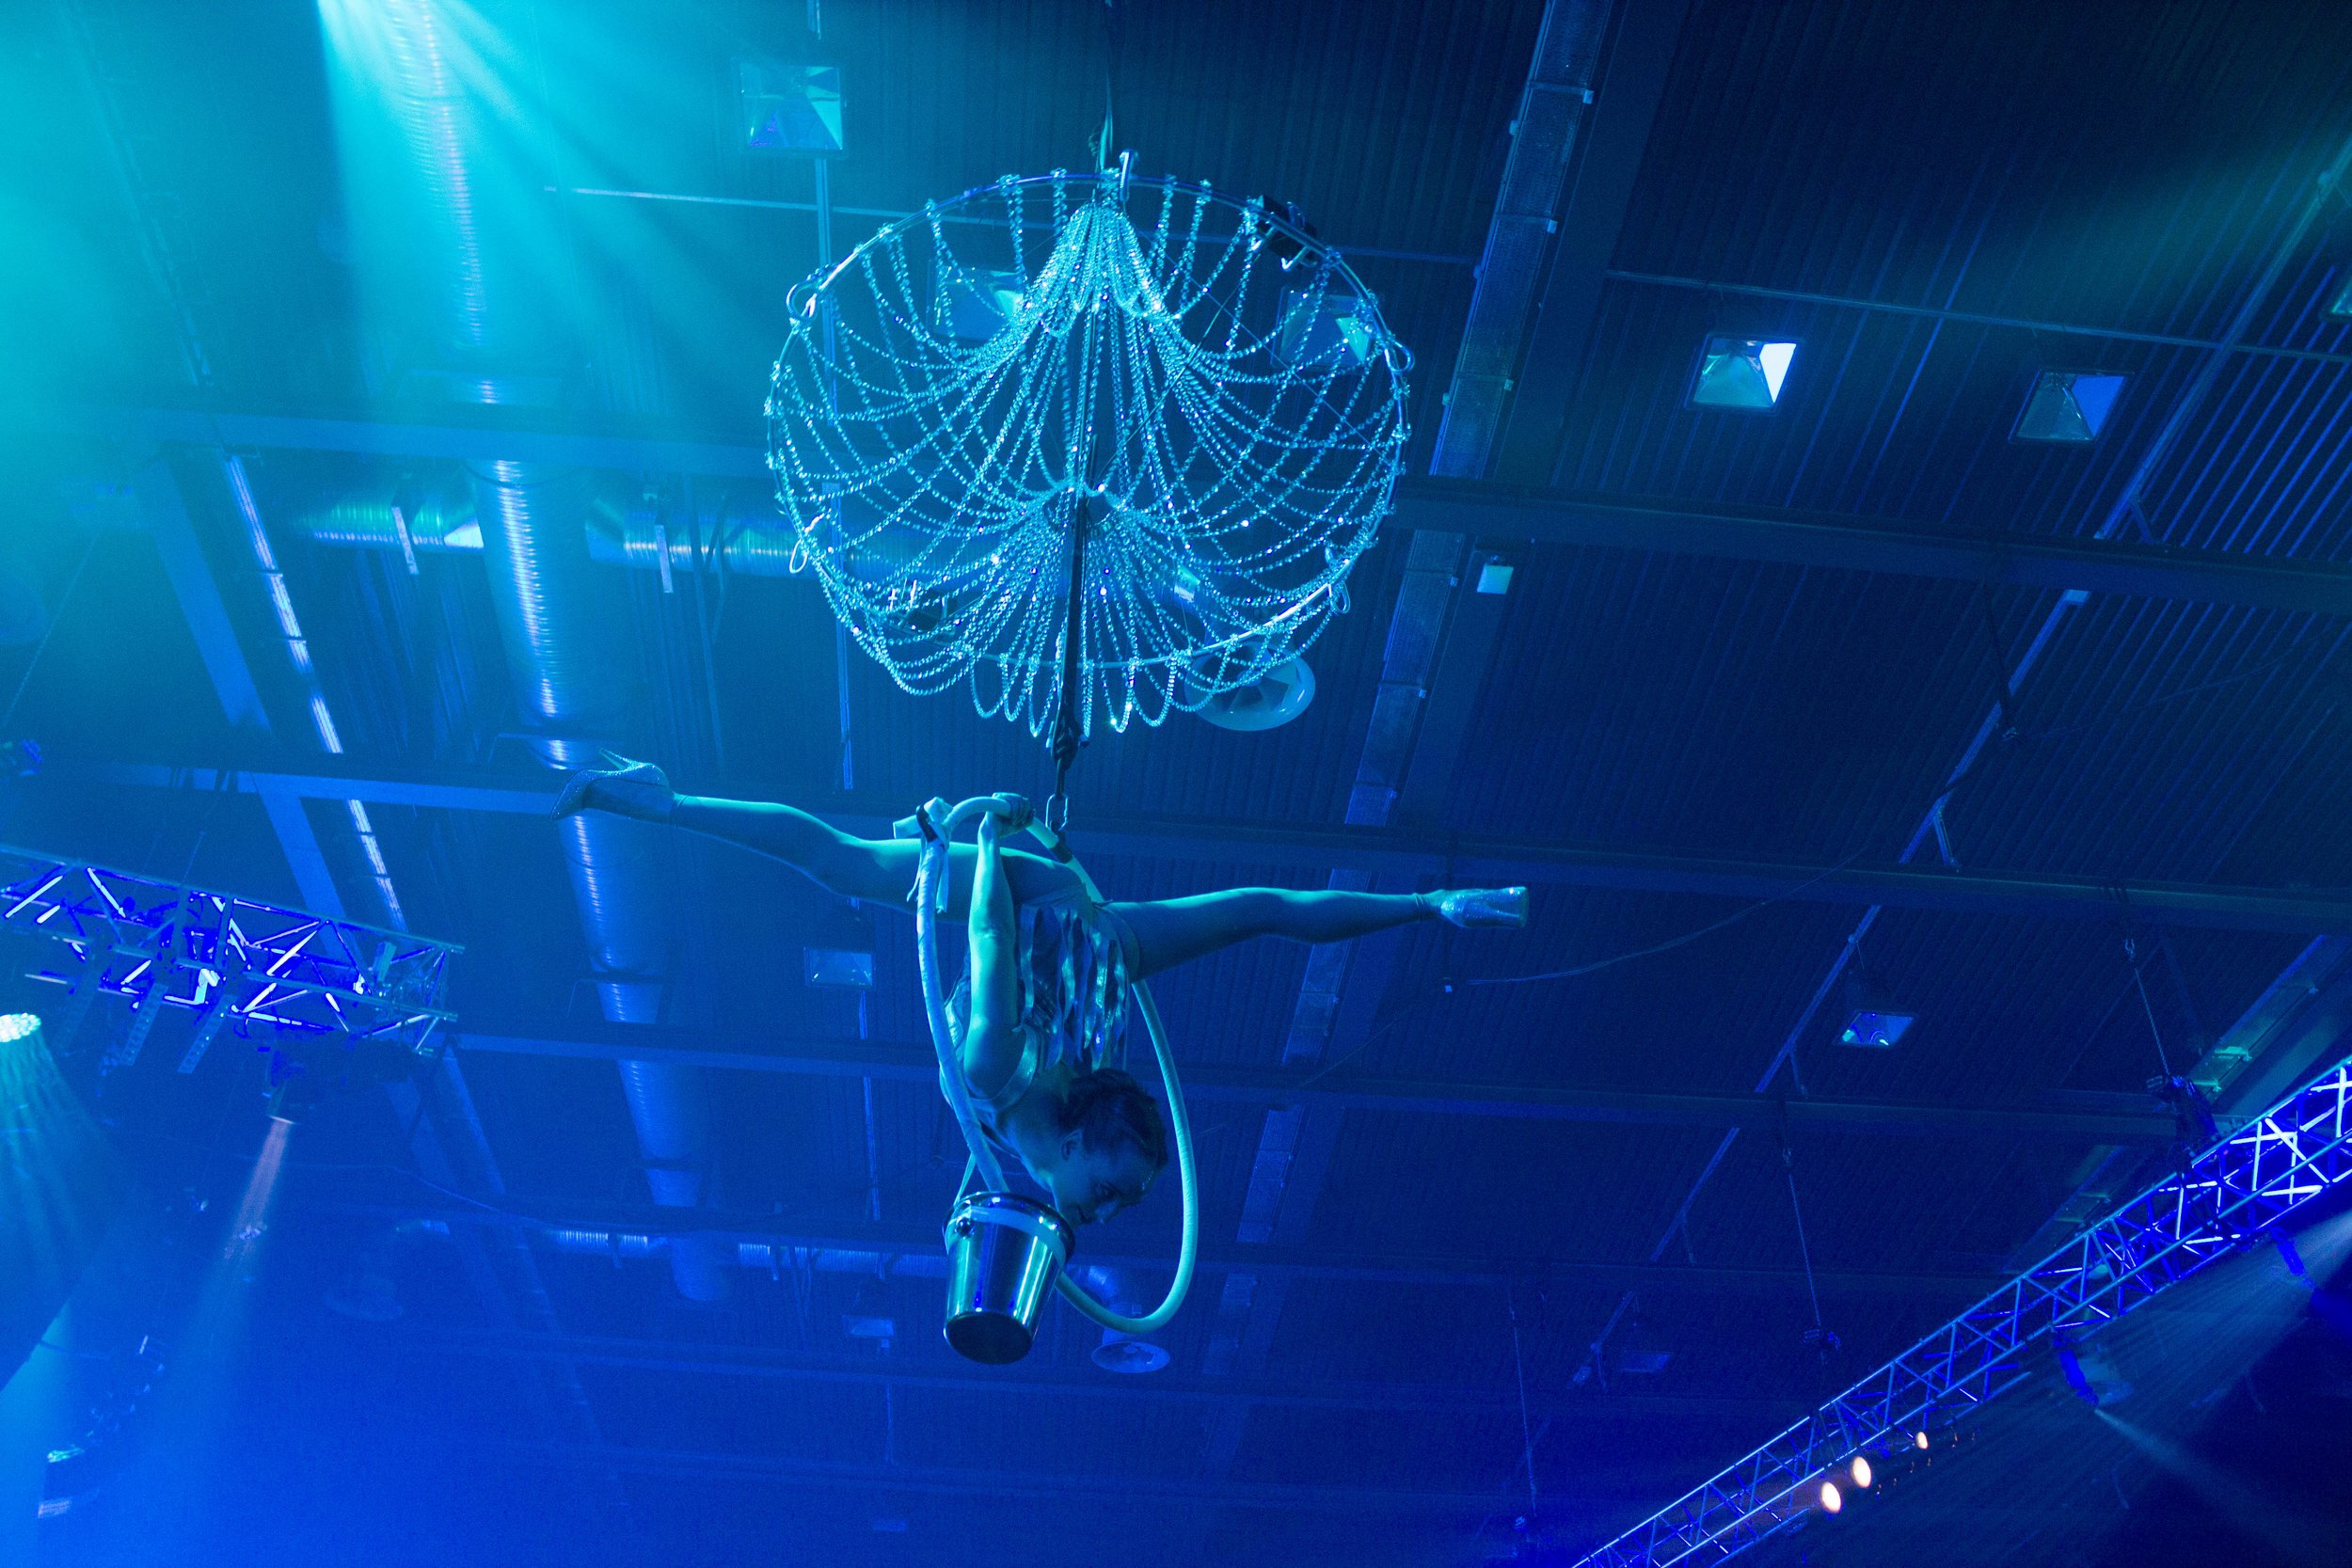 5 reasons you should book our aerial artists for your next event